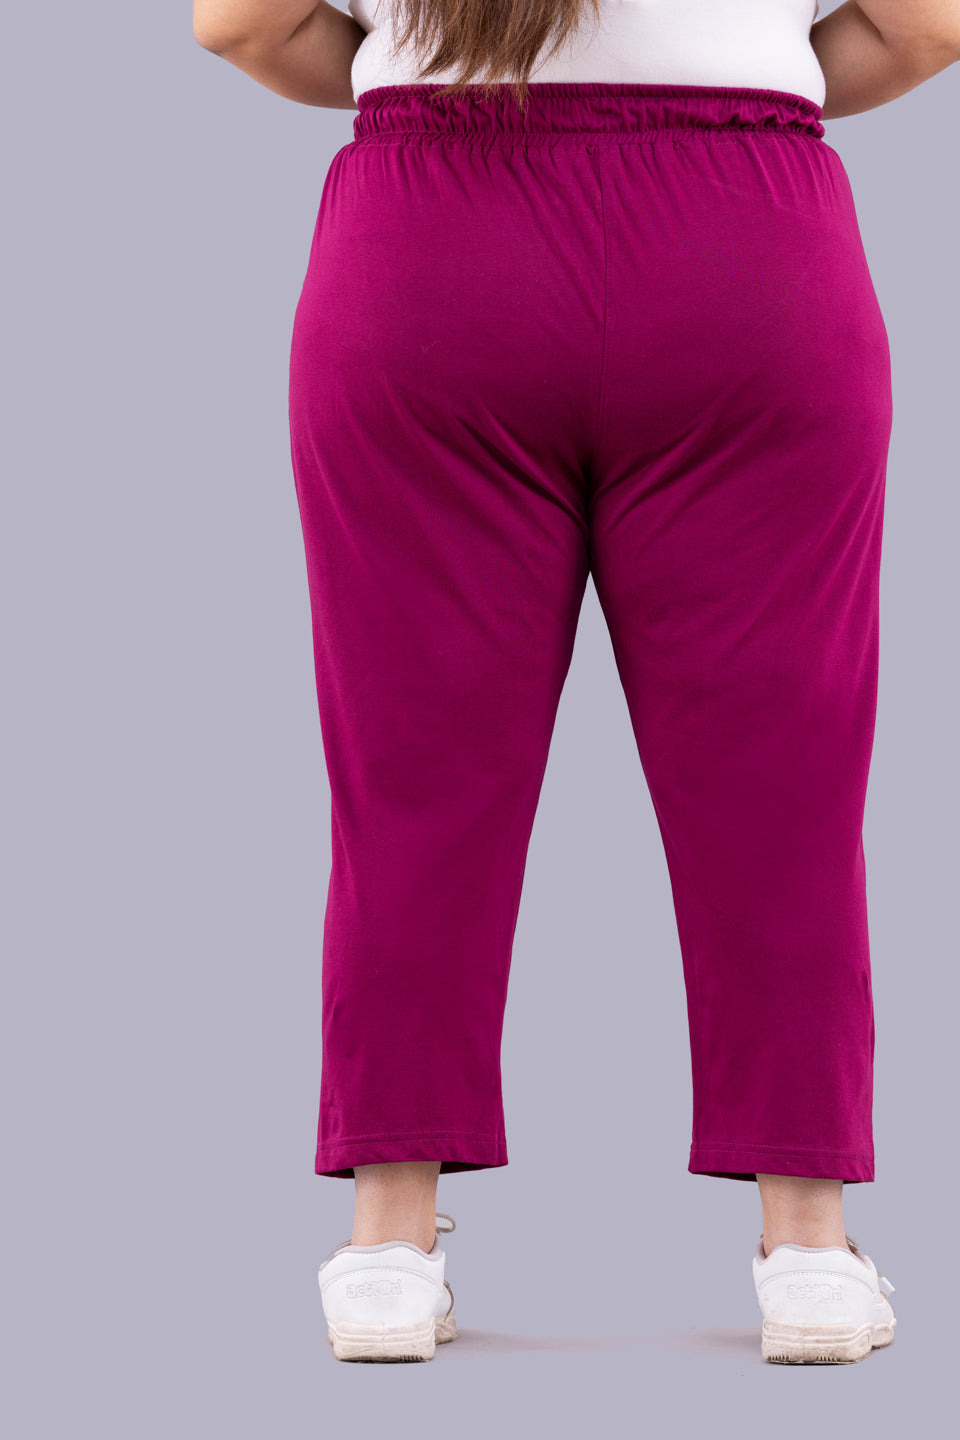 Buy Comfy Purple Half Cotton Capri Pants For Women Online In India By  Cupidclothing's – Cupid Clothings